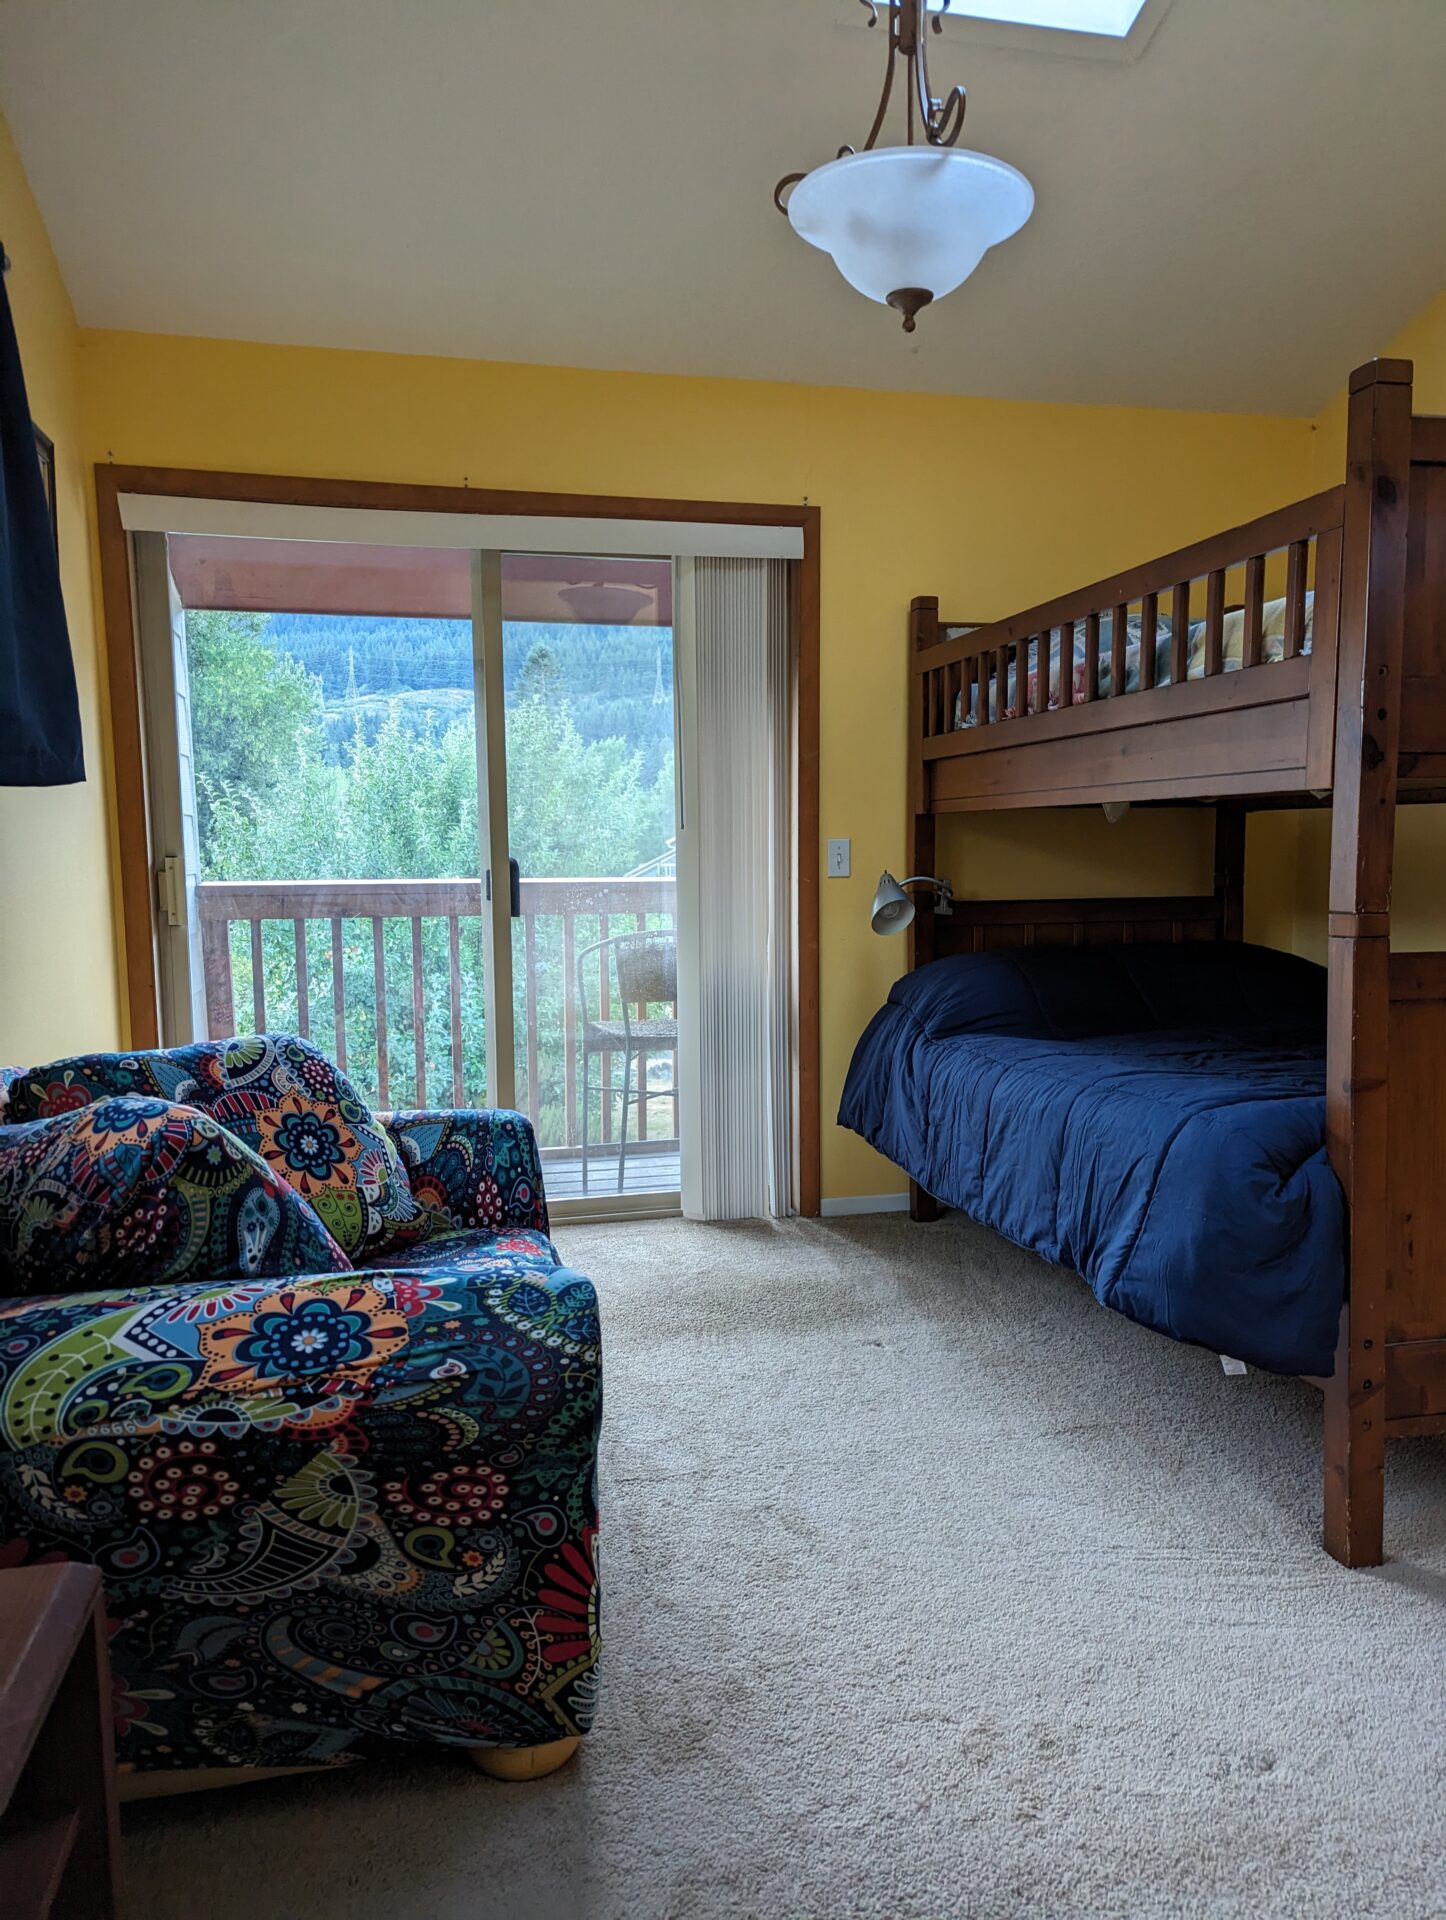 2 rooms for rent in North Bonneville, WA